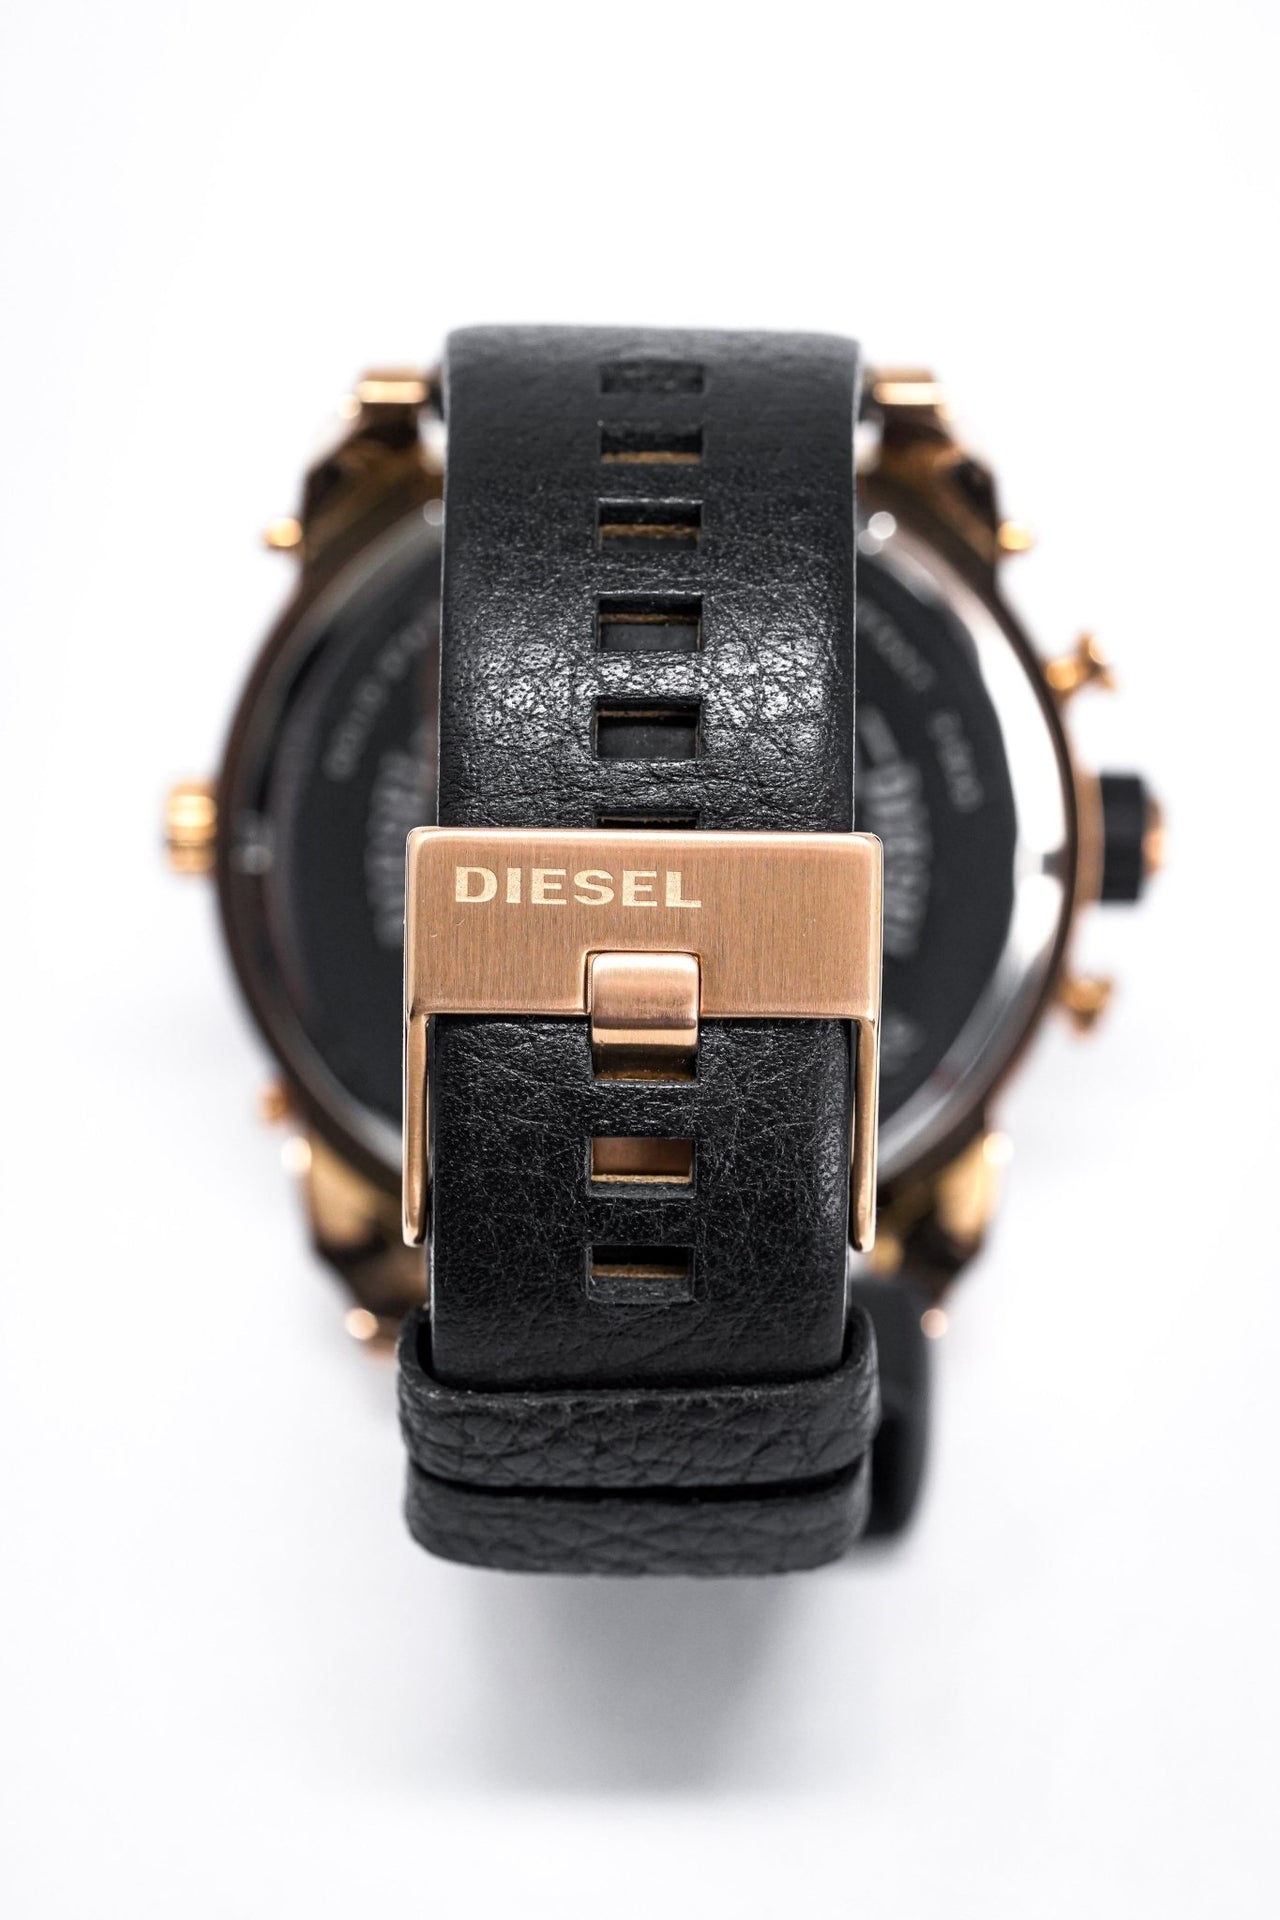 Diesel Men's Chronograph Watch Big Daddy Rose Gold - Watches & Crystals